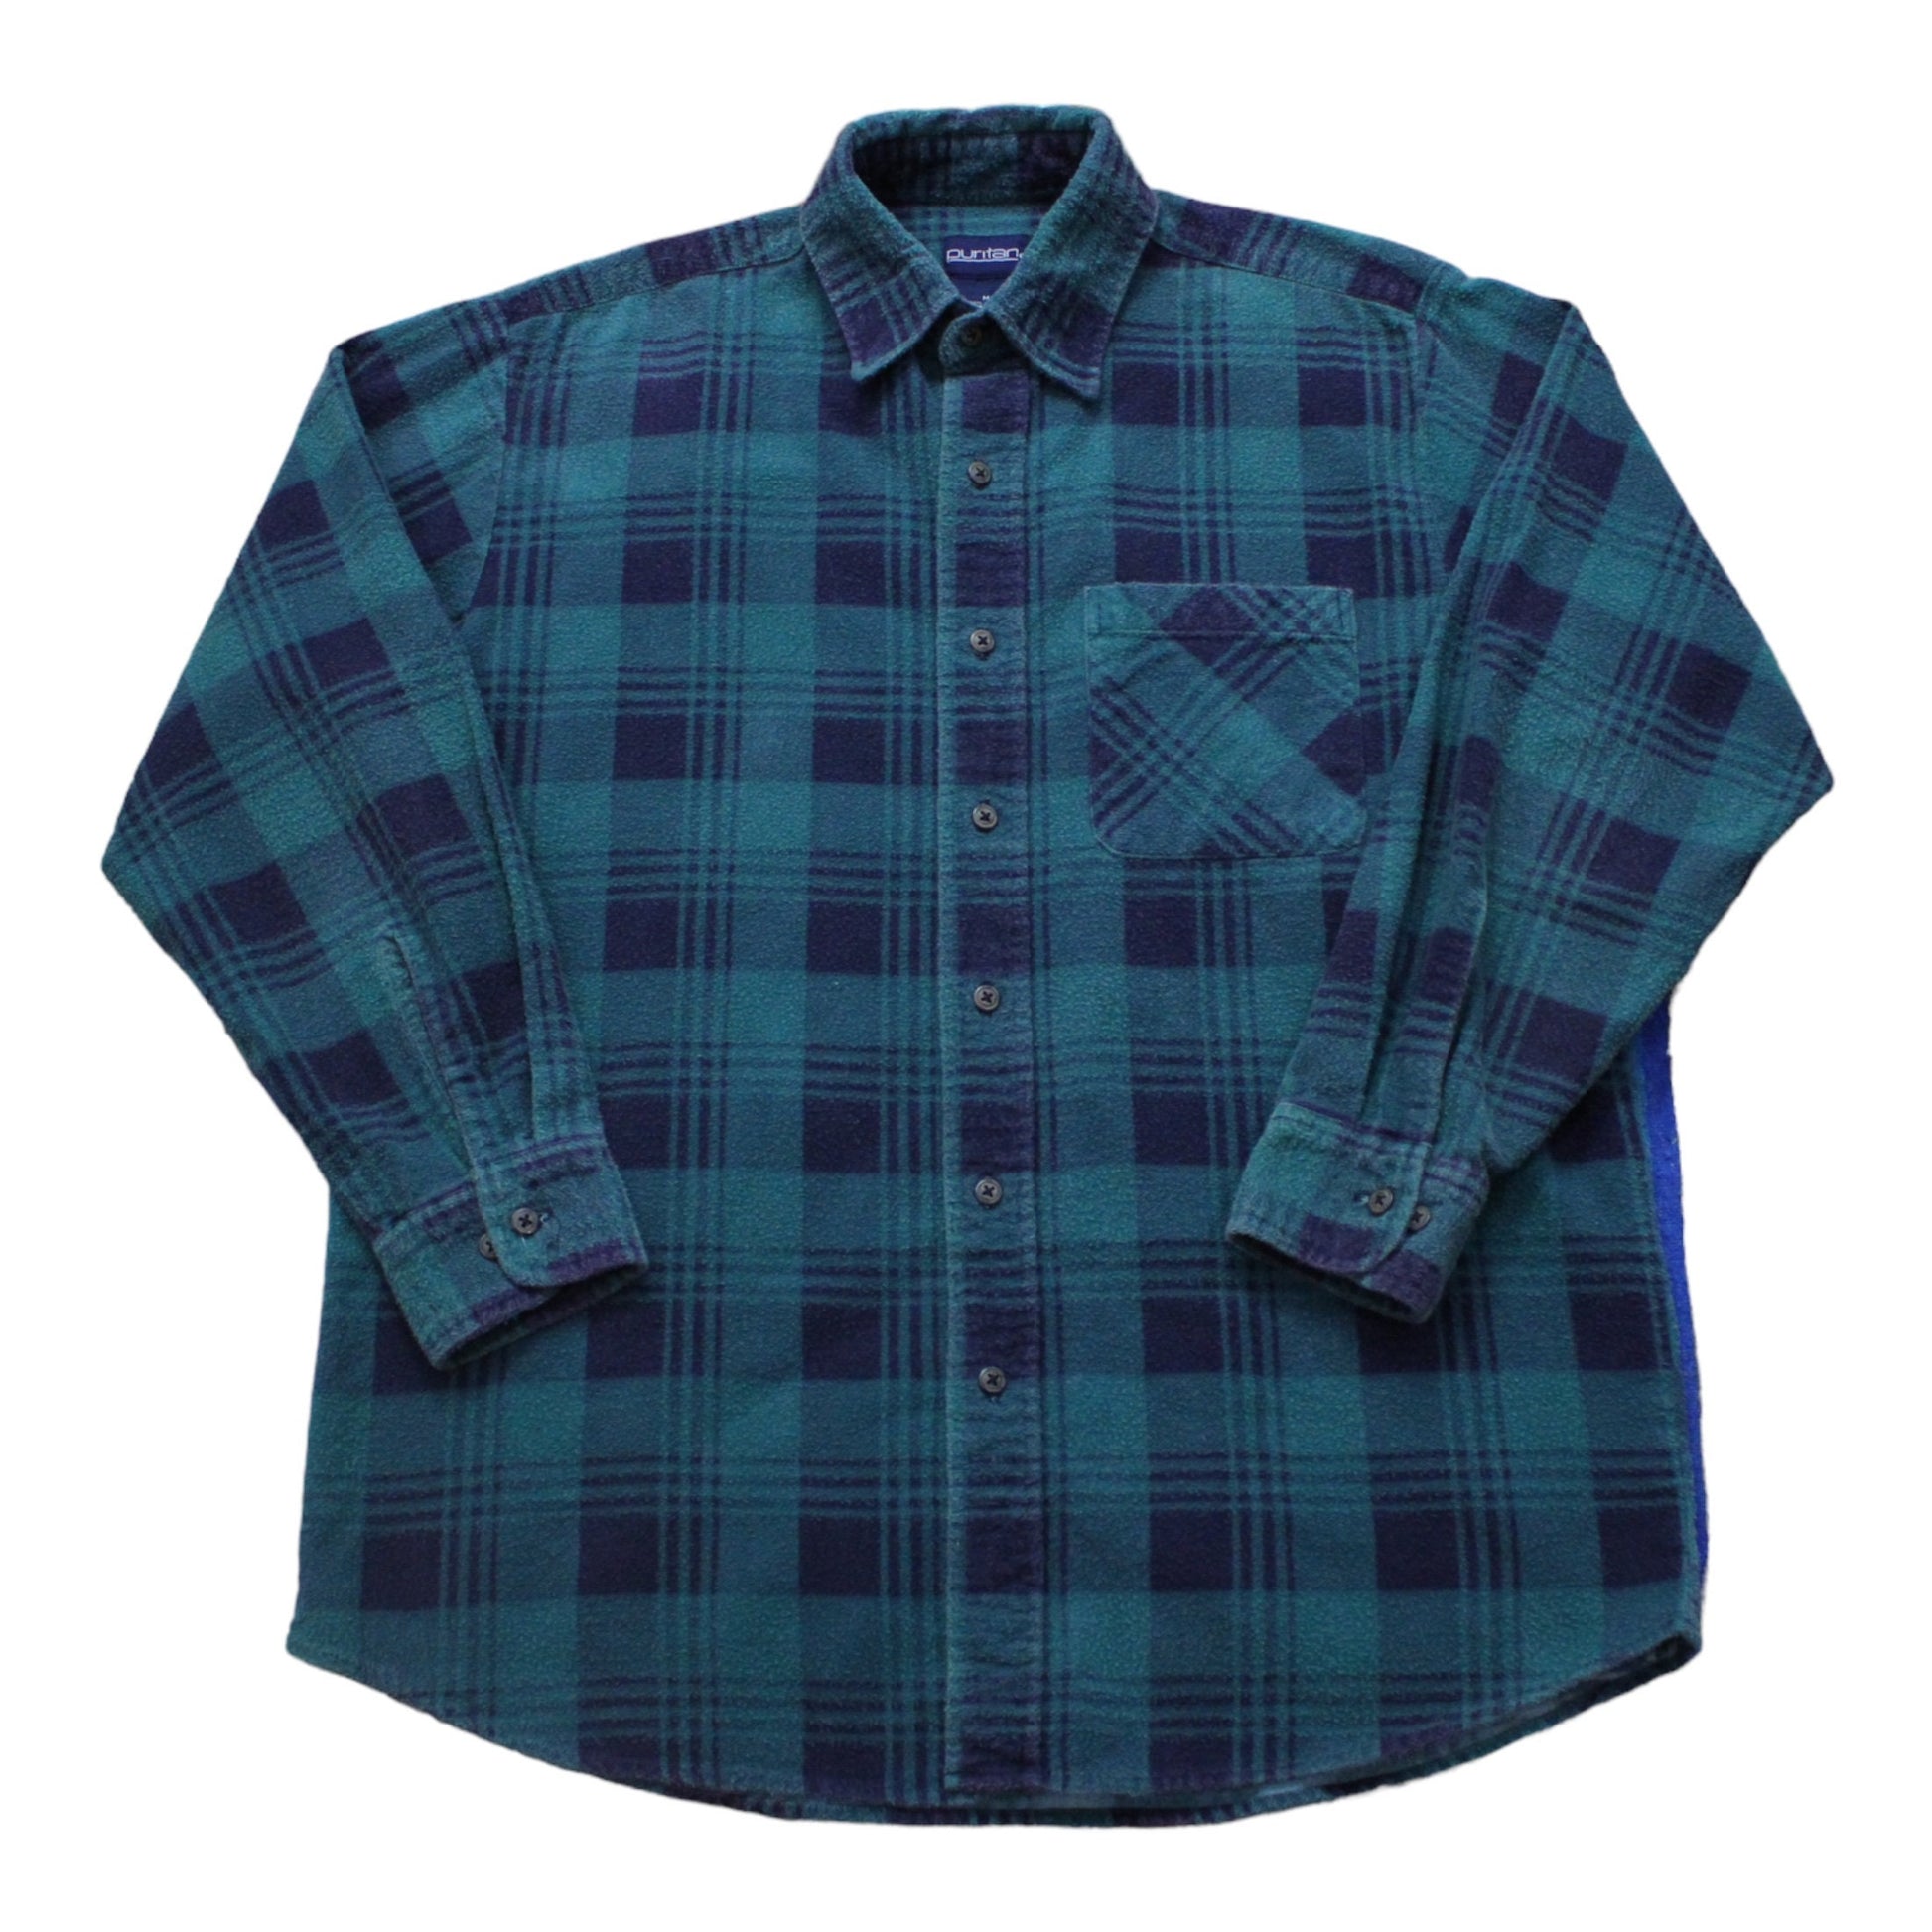 1990s Puritan Blue and Green Plaid Printed Cotton Shirt Size L